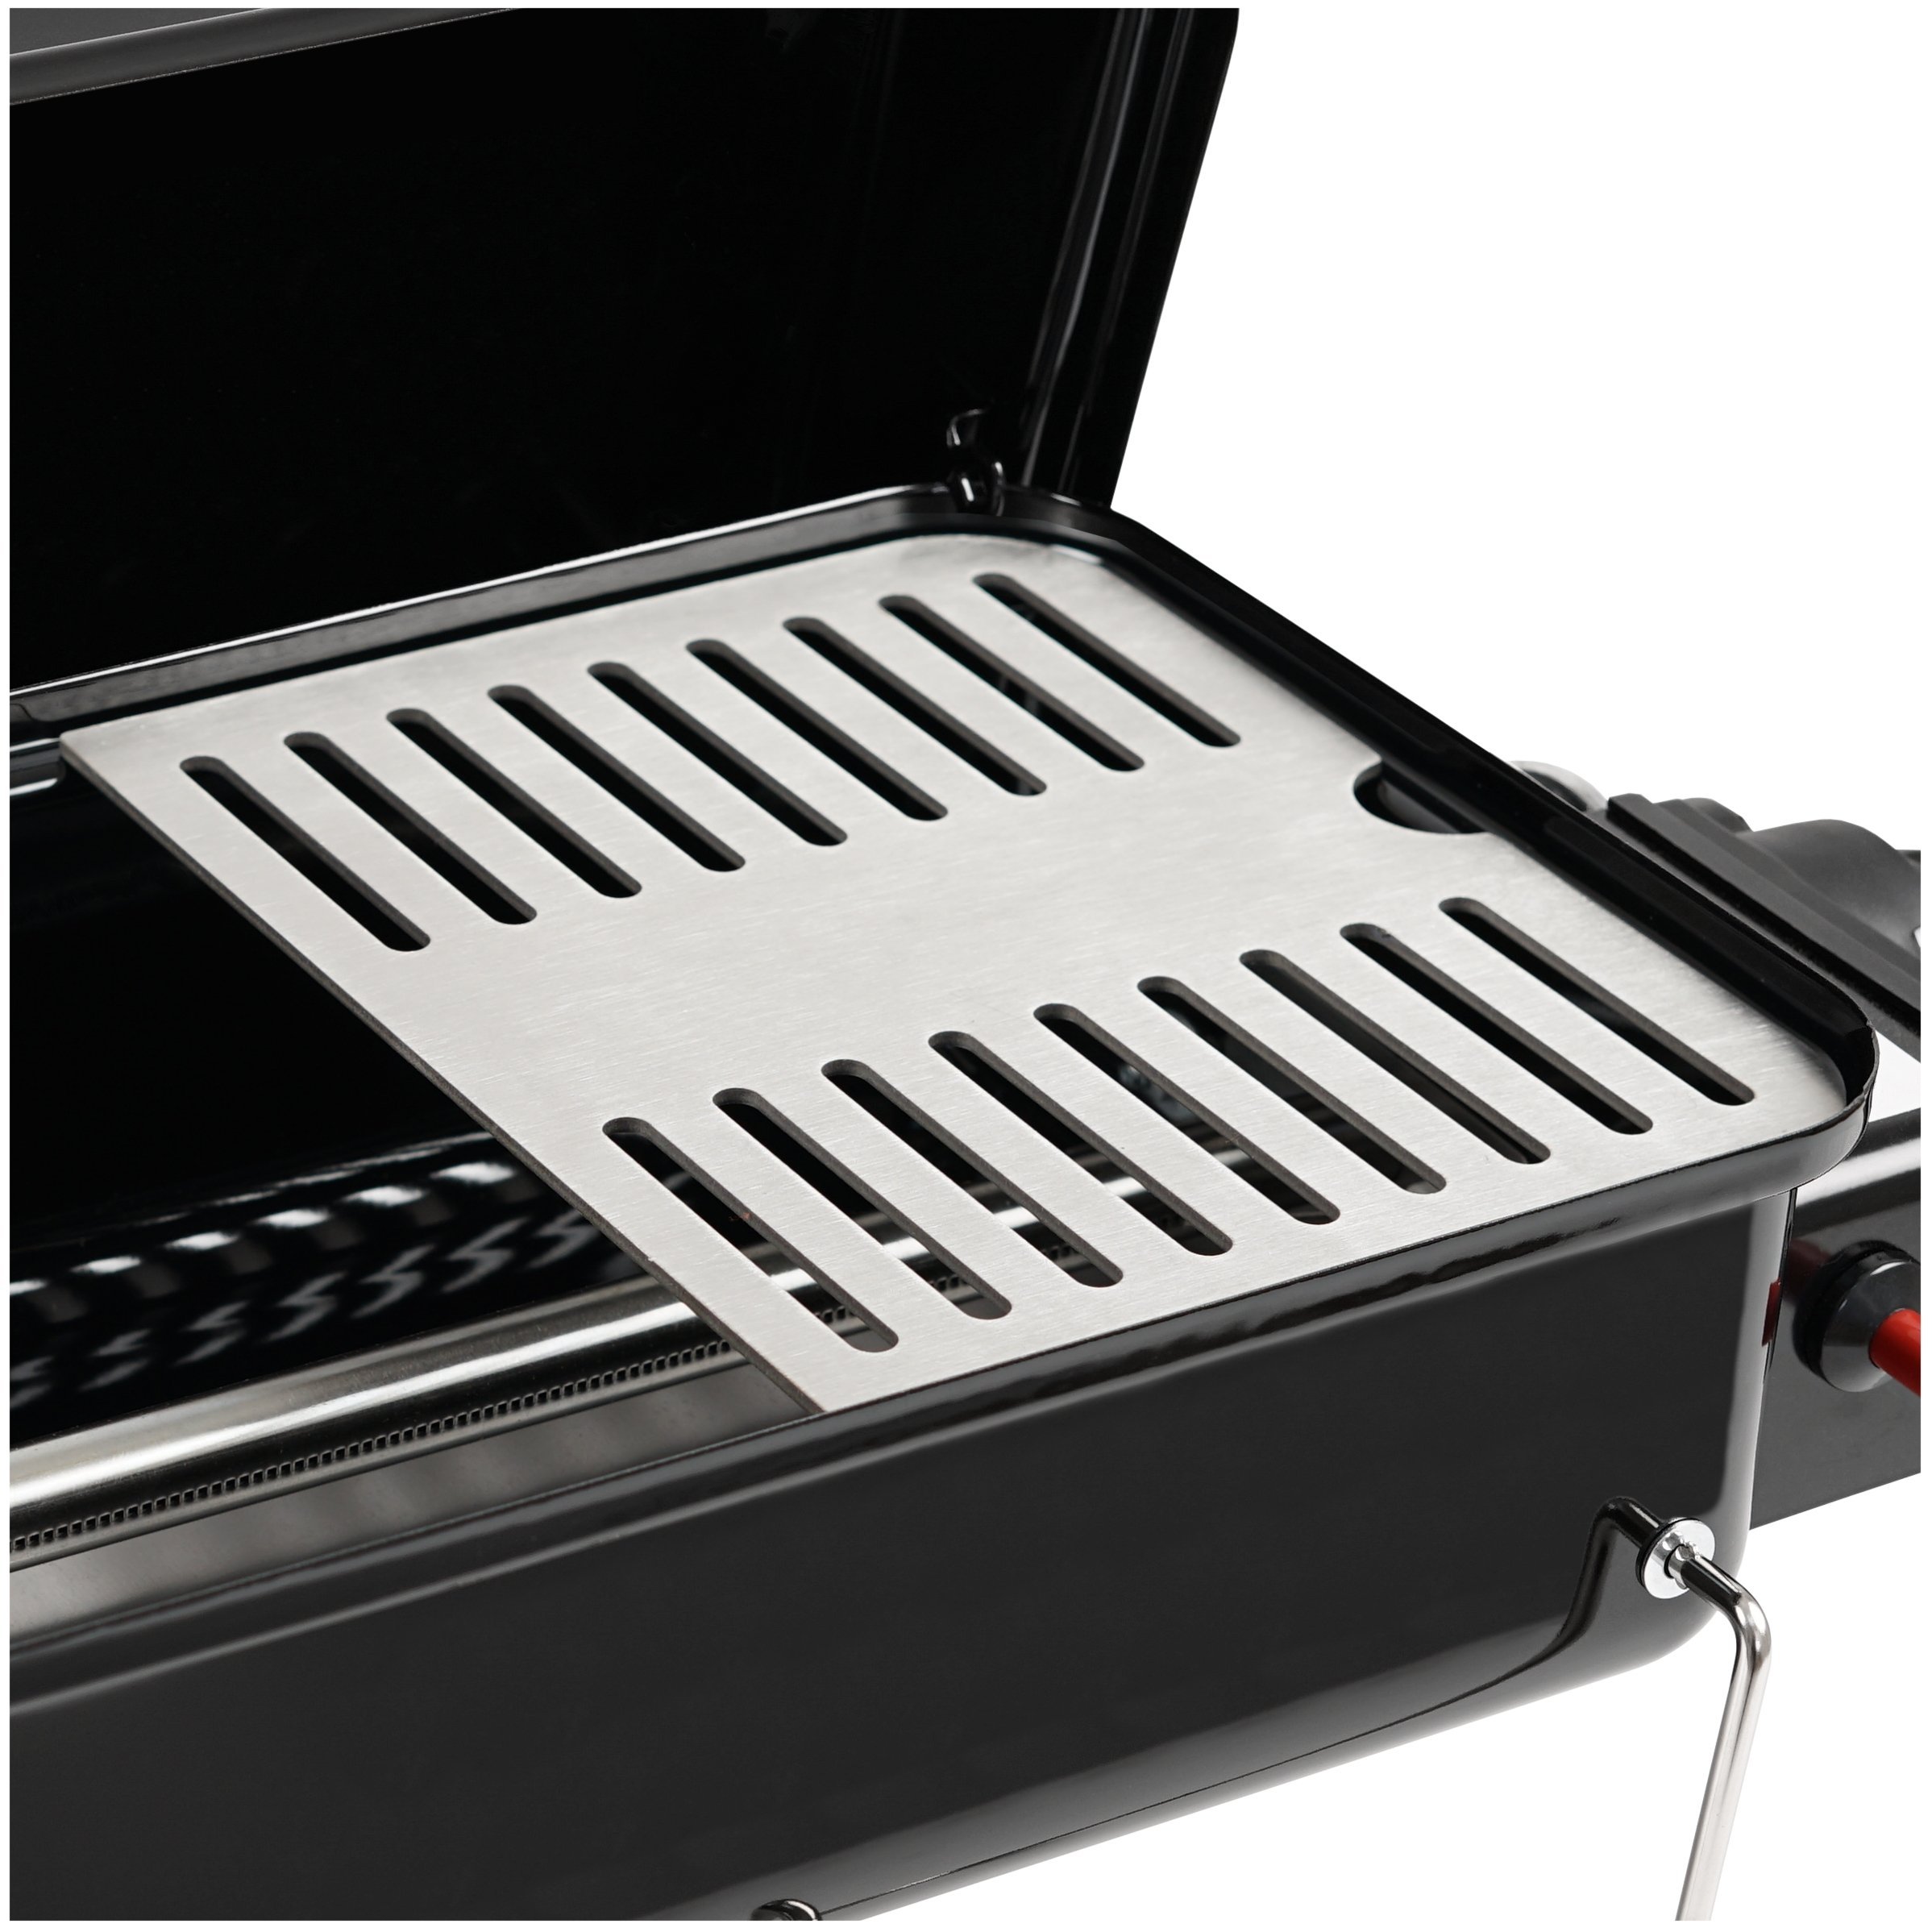 BBQ-TORO stainless steel grill grate, suitable for Weber Go Anywhere Stainless Steel Weber Grill Grates